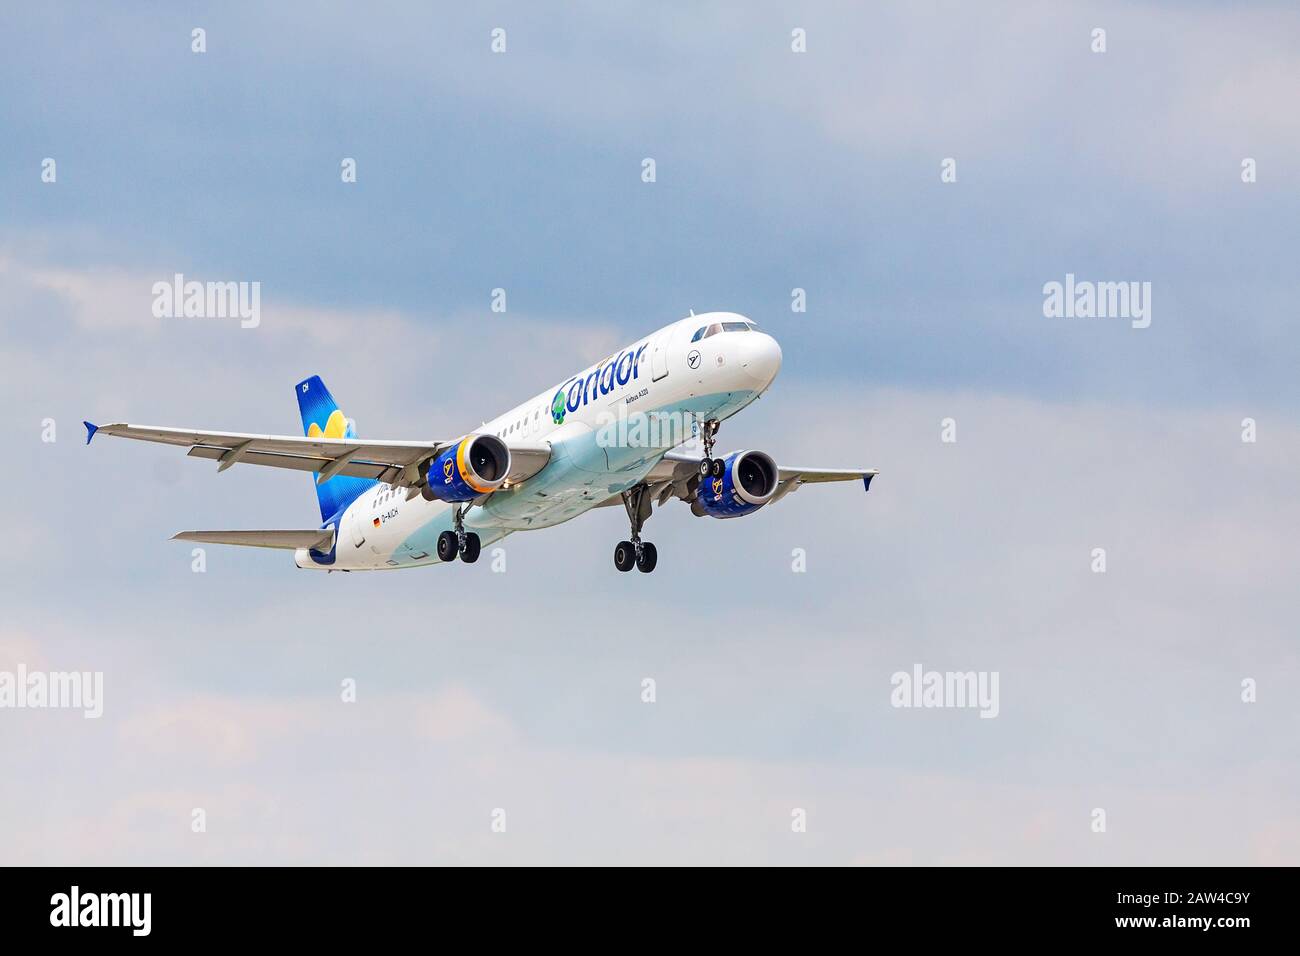 Stuttgart, Germany - April 29, 2017: Airbus airplane A320 from Condor after takeoff from runway - airport Stuttgart, blue sky with clouds in backgroun Stock Photo